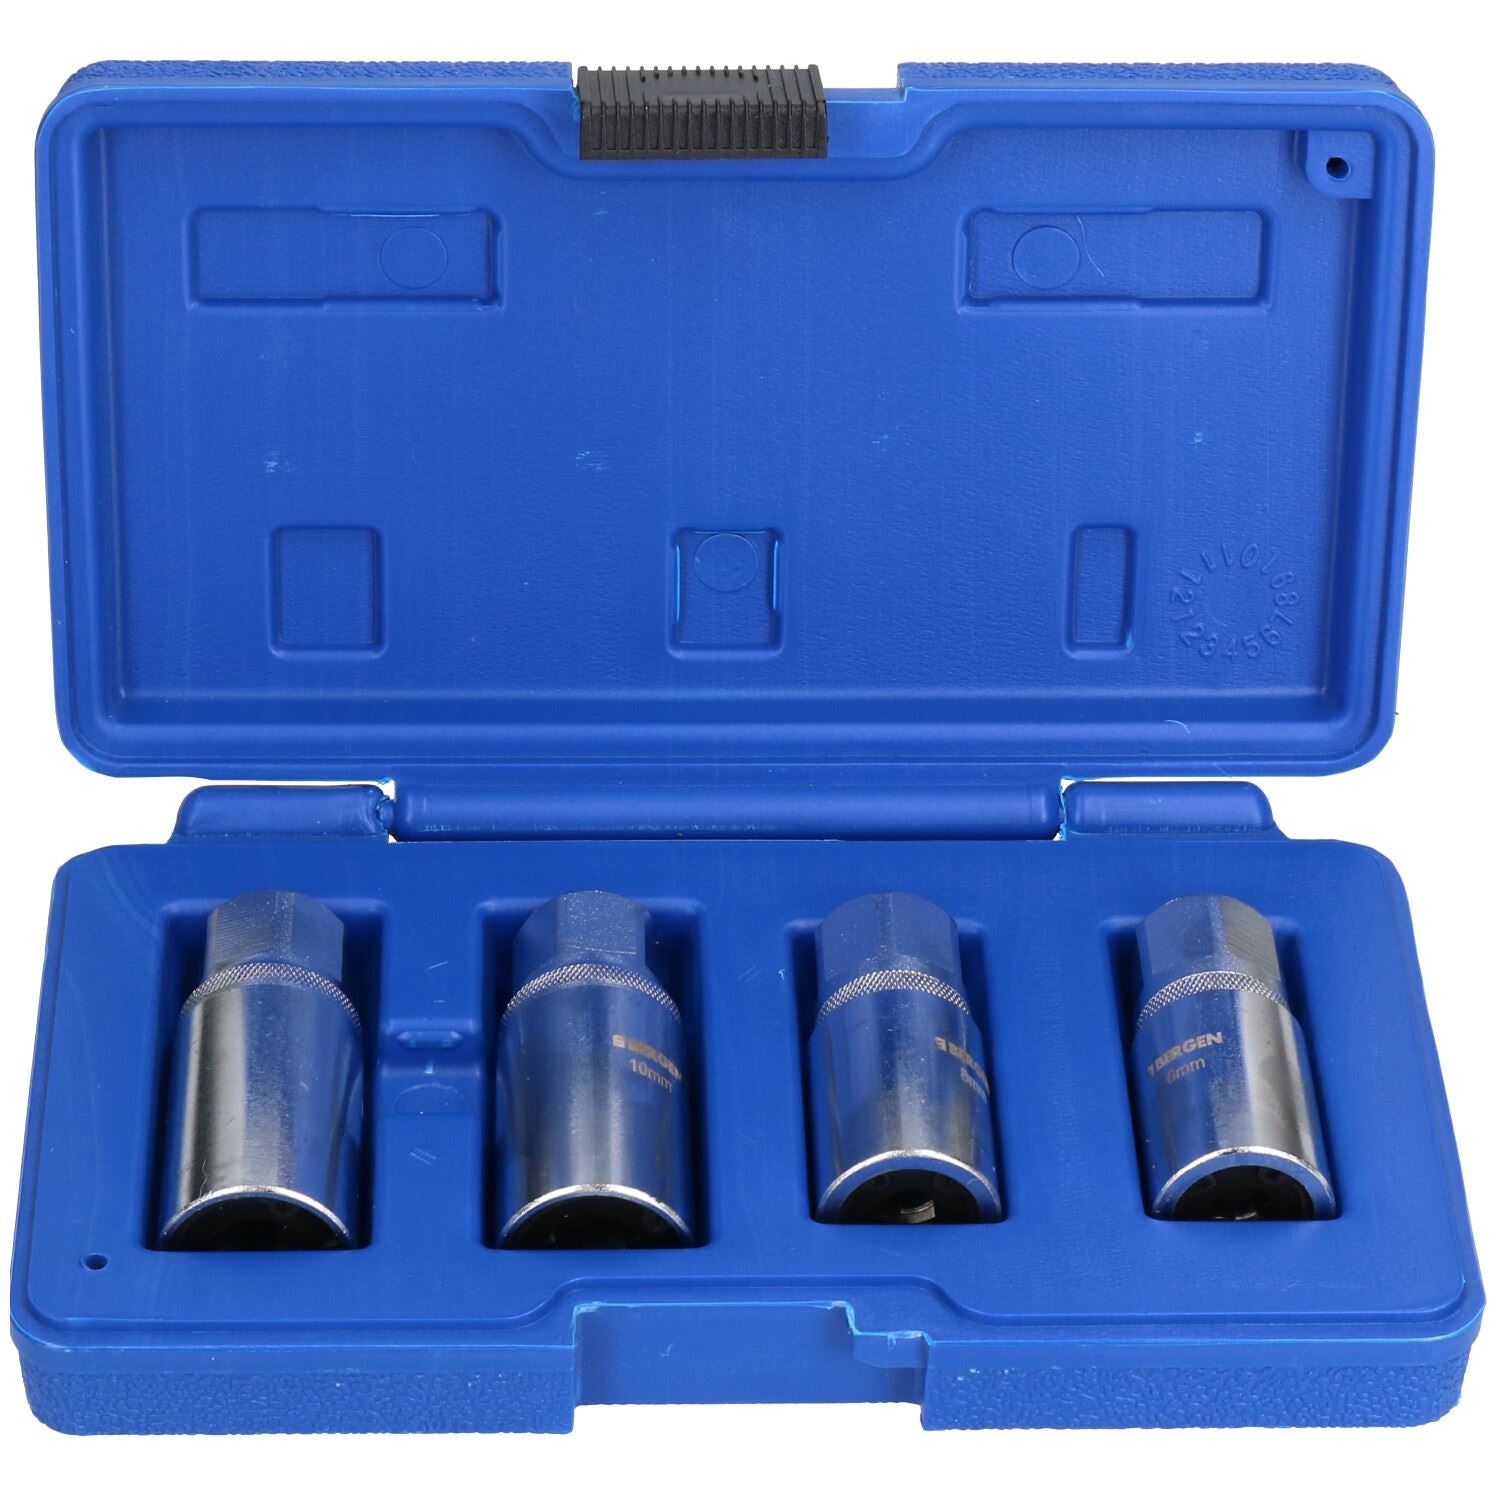 Socket extractor Installer Remover Roller Type 4pc Set Metric or Imperial AT156